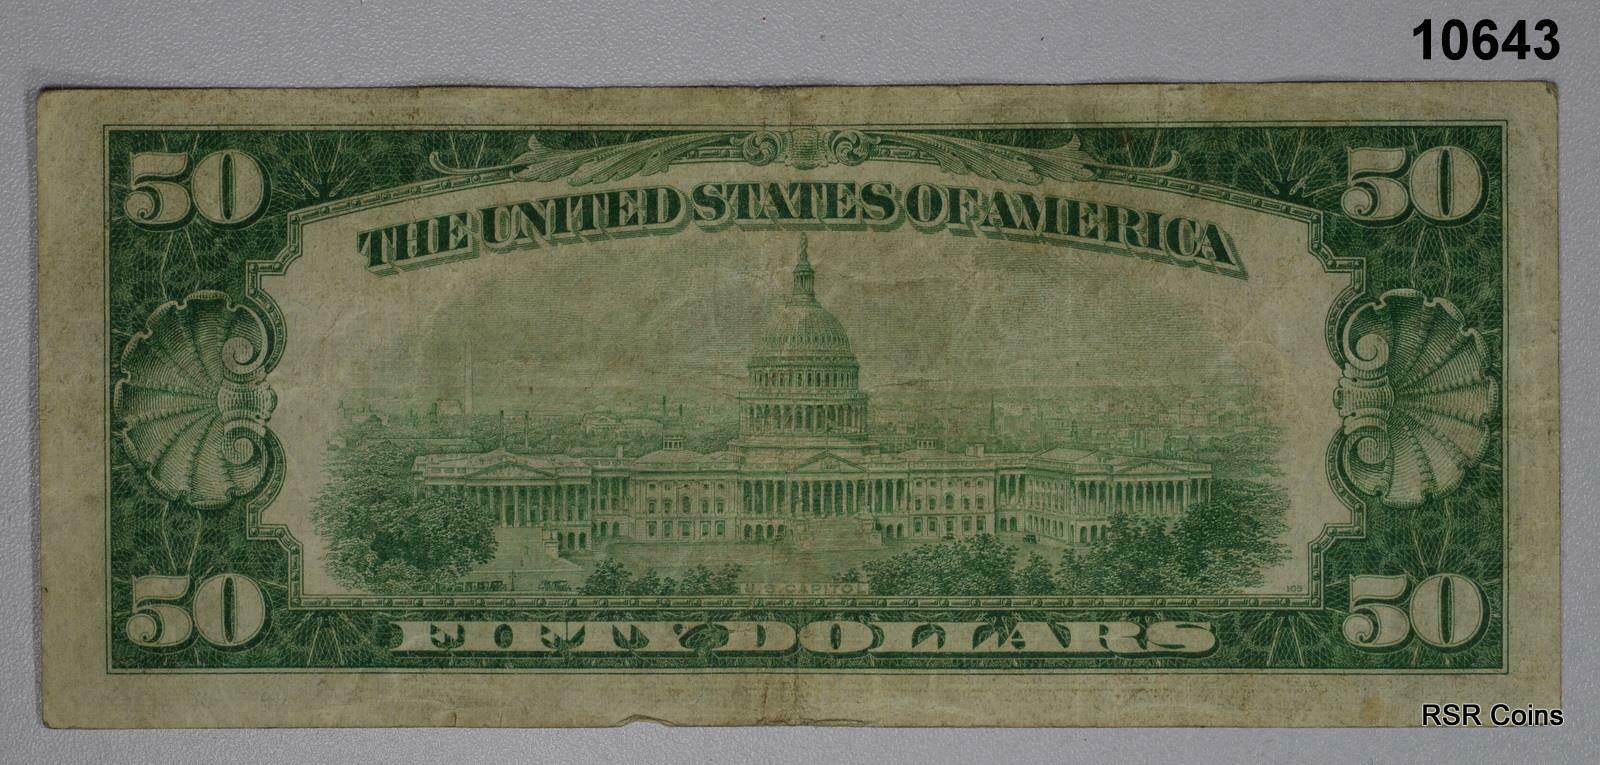 1934 $50 FEDERAL RESERVE NOTE NEW YORK #10643